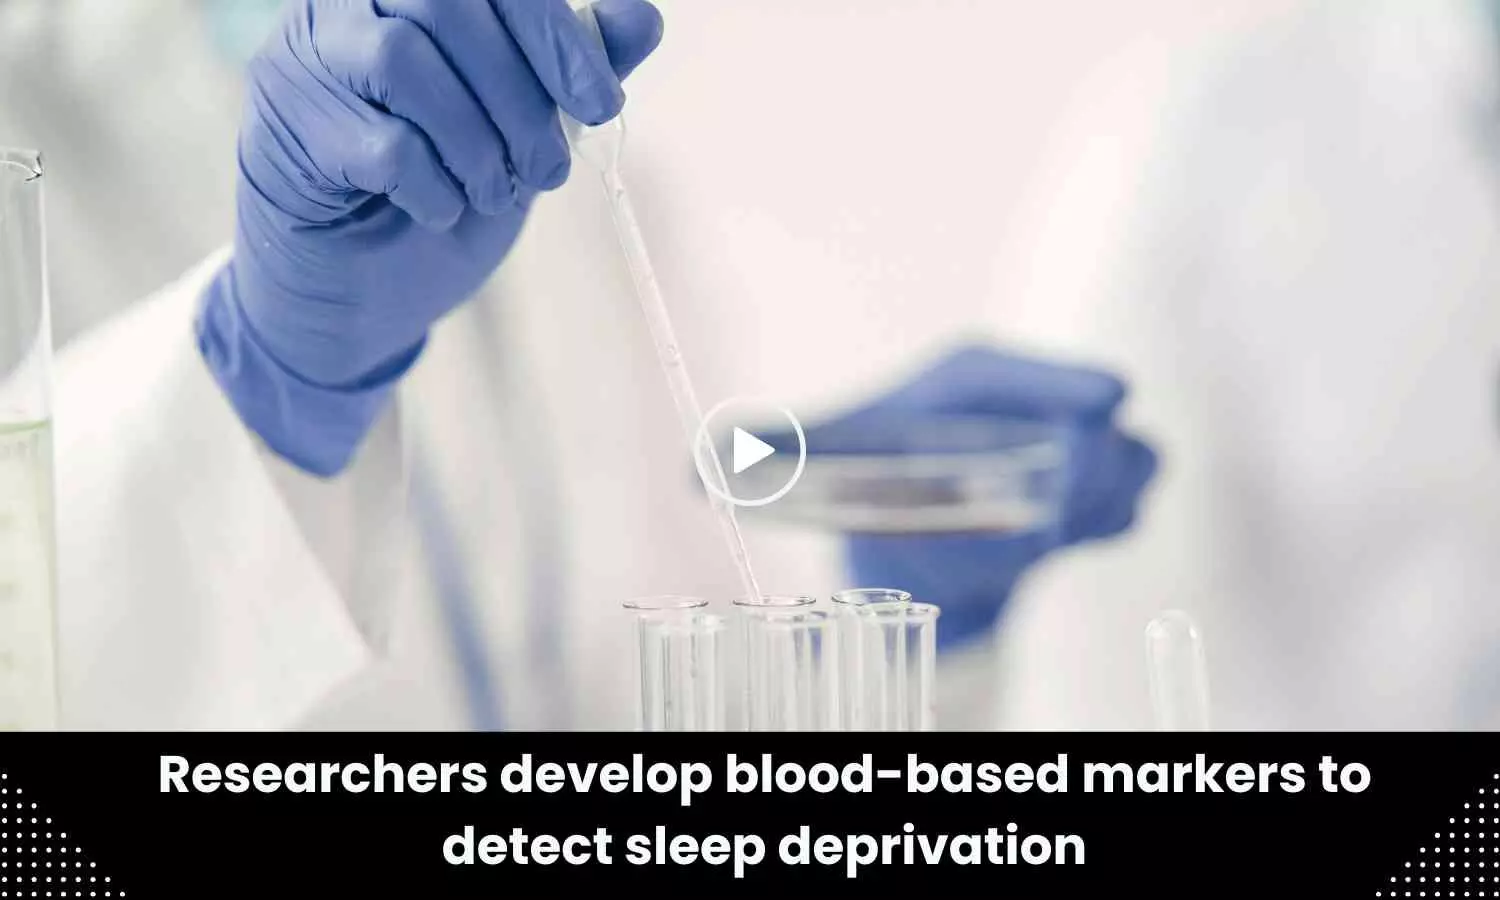 Researchers develop blood-based markers to detect sleep deprivation